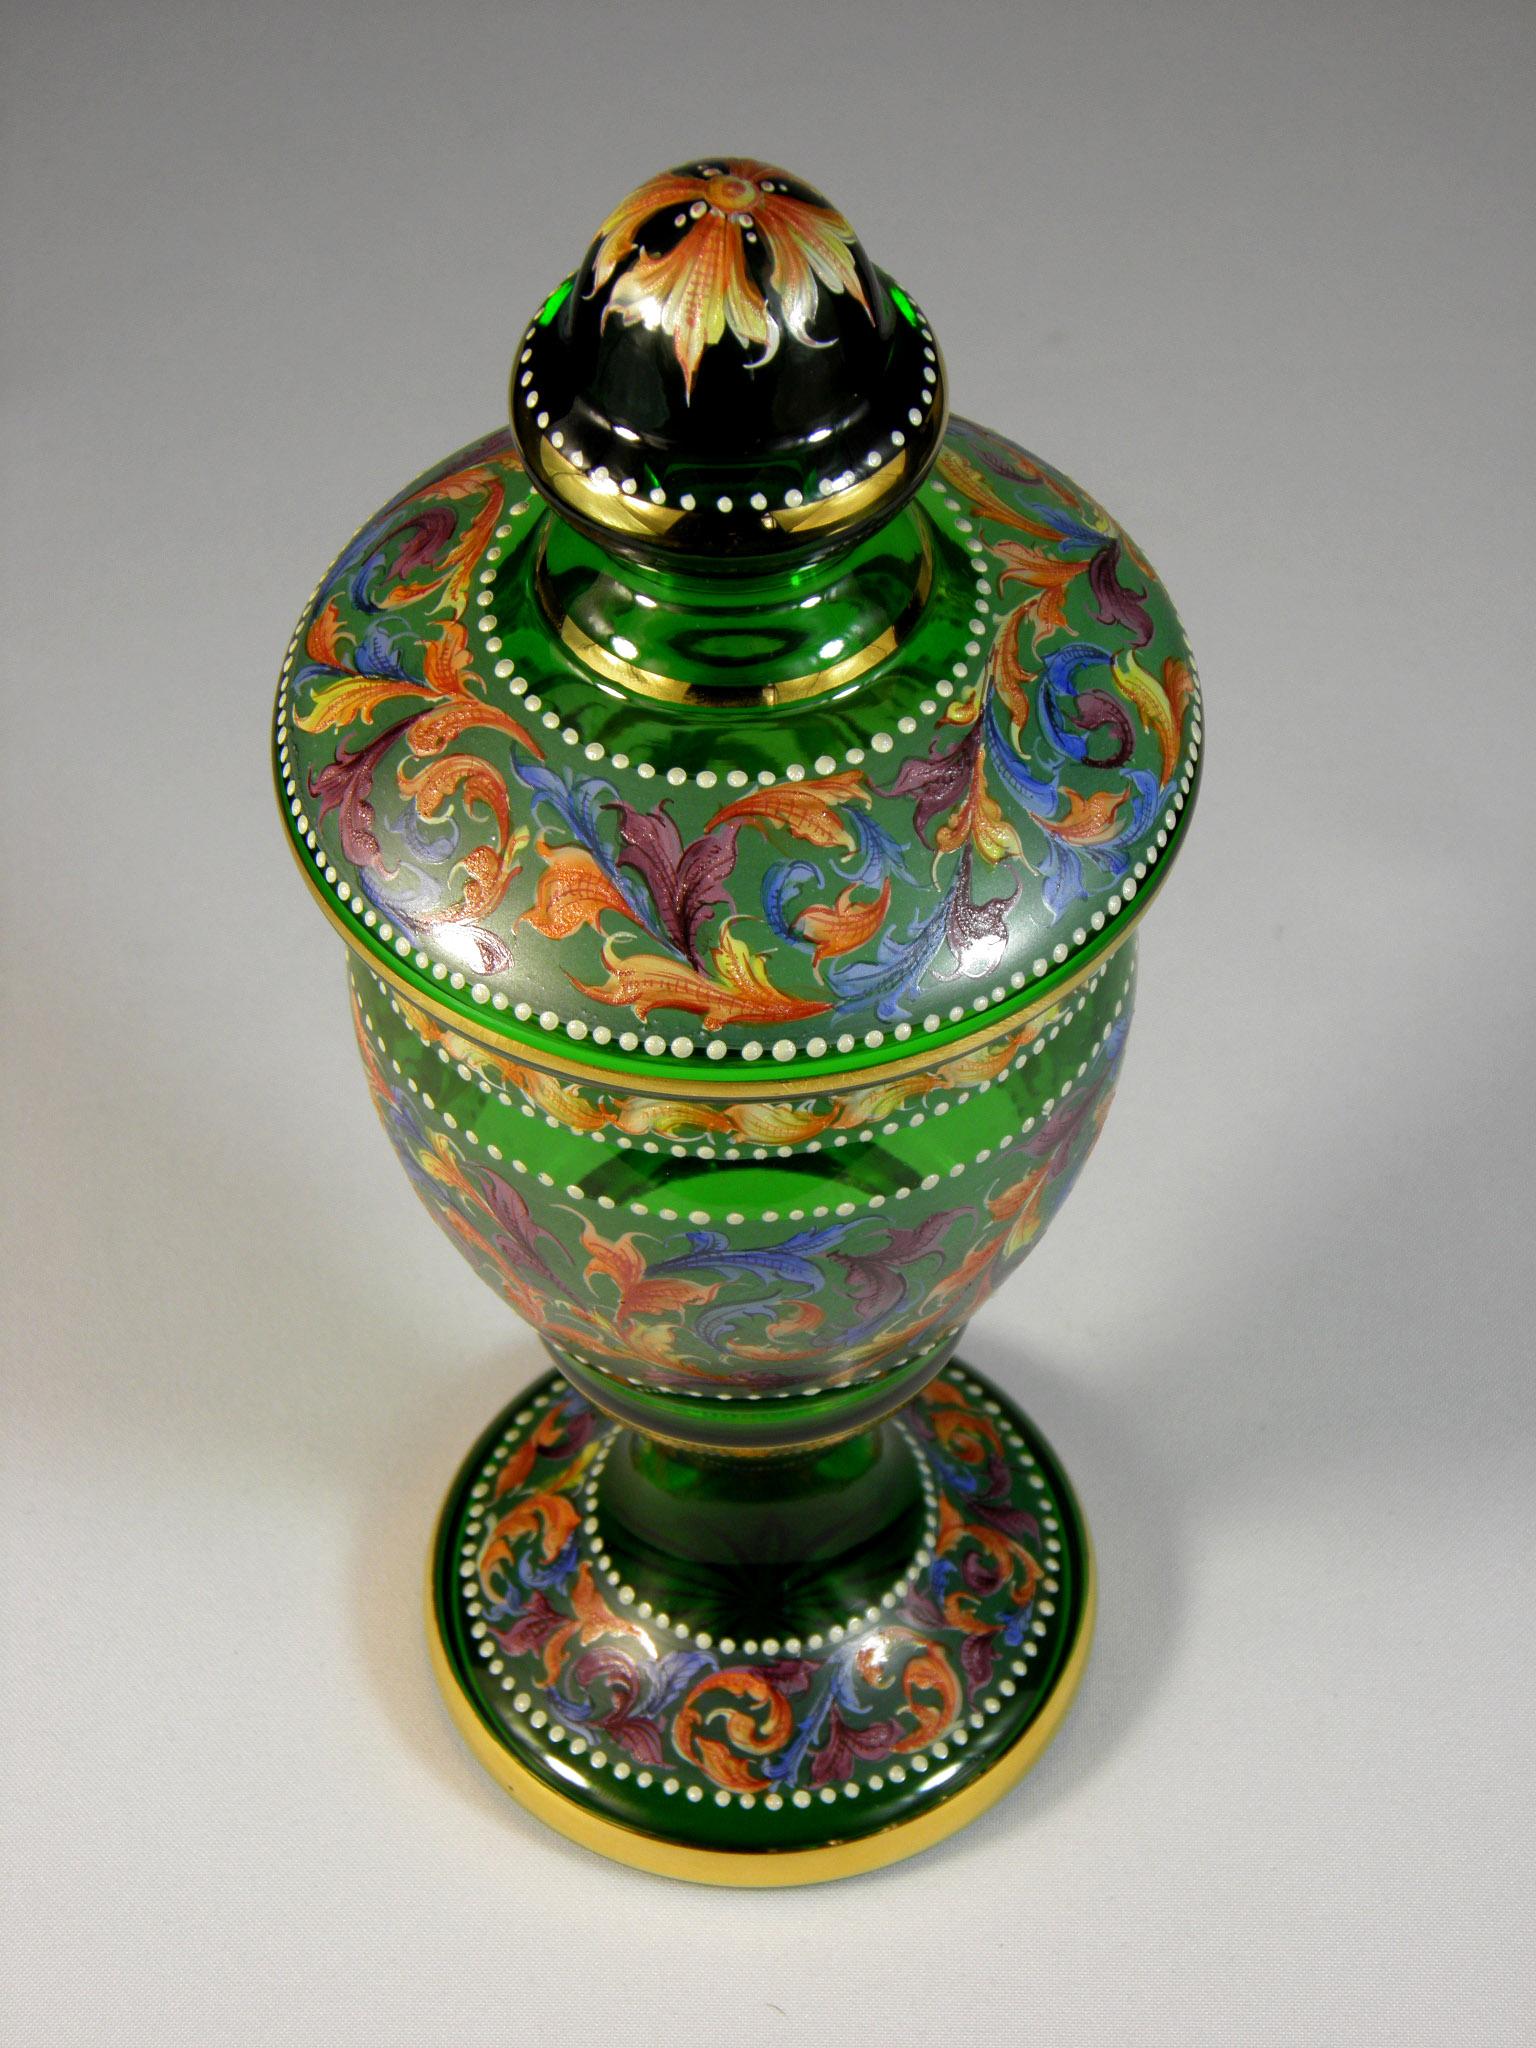 Handmade green glass goblet with lid, hand painted,
Everything is made by using original techniques,
Paints are fired at temperatures of 520-540 degrees Celsius.
Hand cut star at the bottom, made in a glass studio in northern Bohemia, 20th